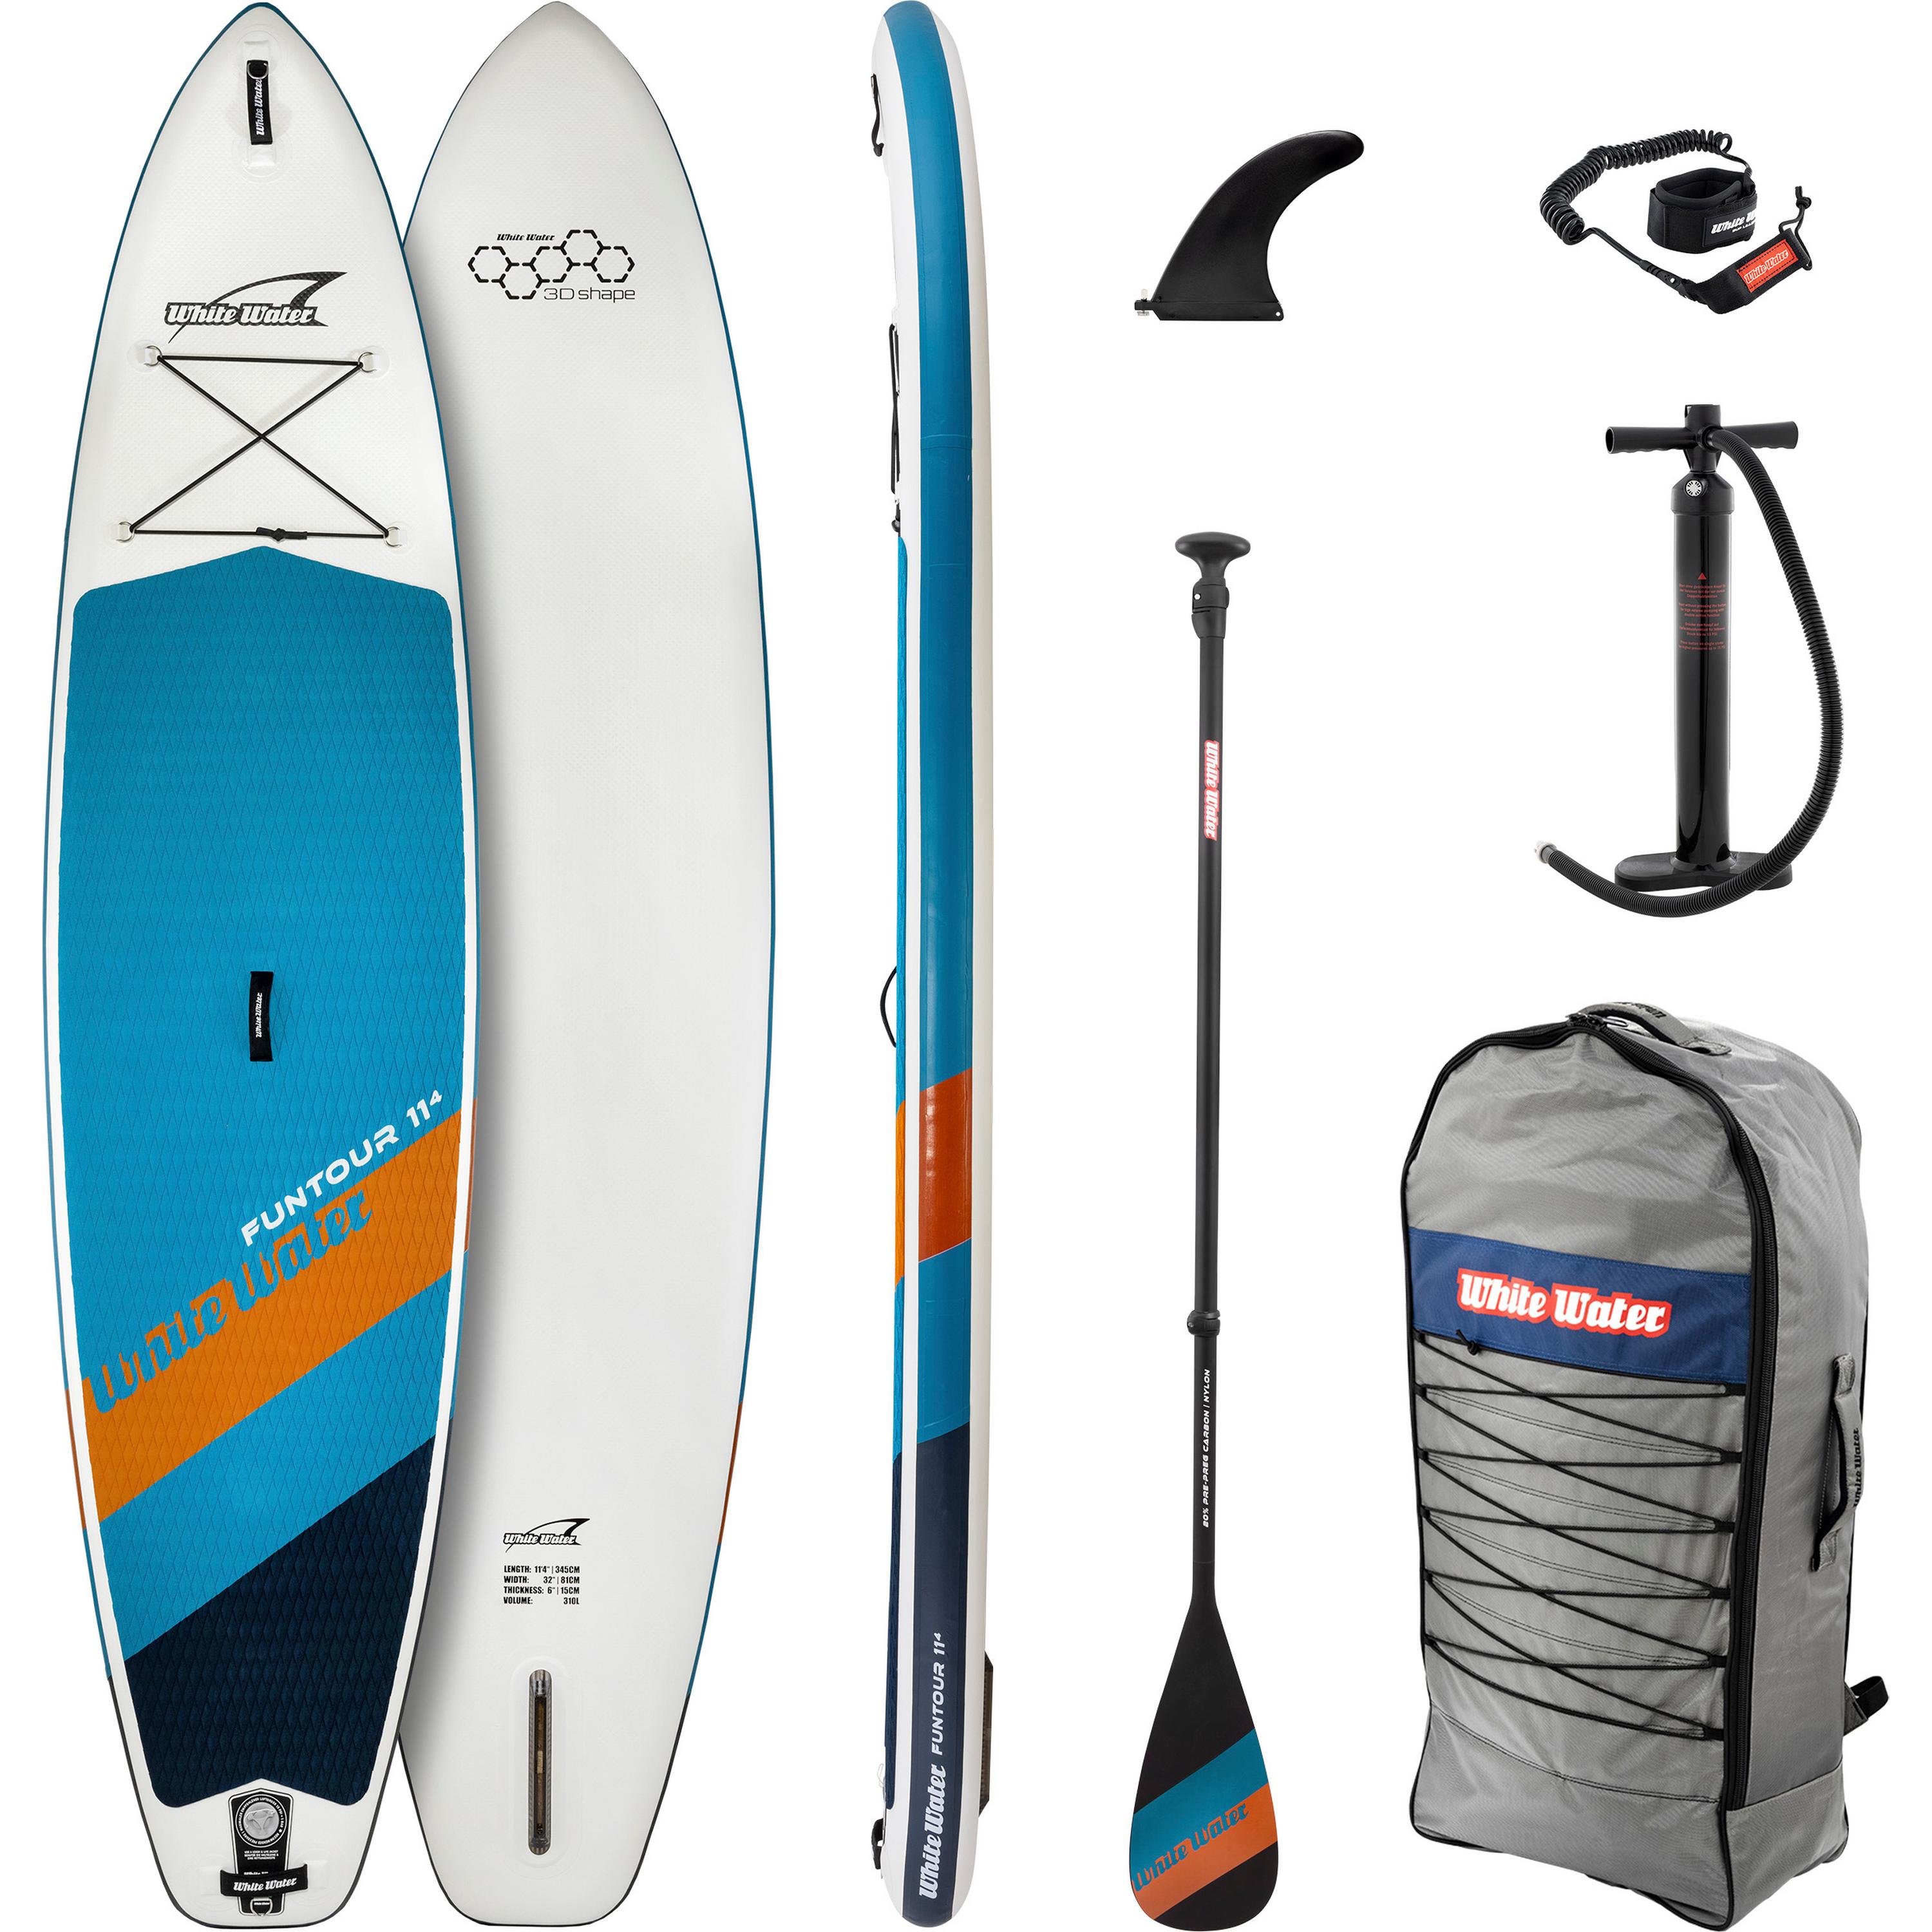 Image of WhiteWater SUP SET Oceanpetrol 11'4" x 32" x 6" SUP Sets